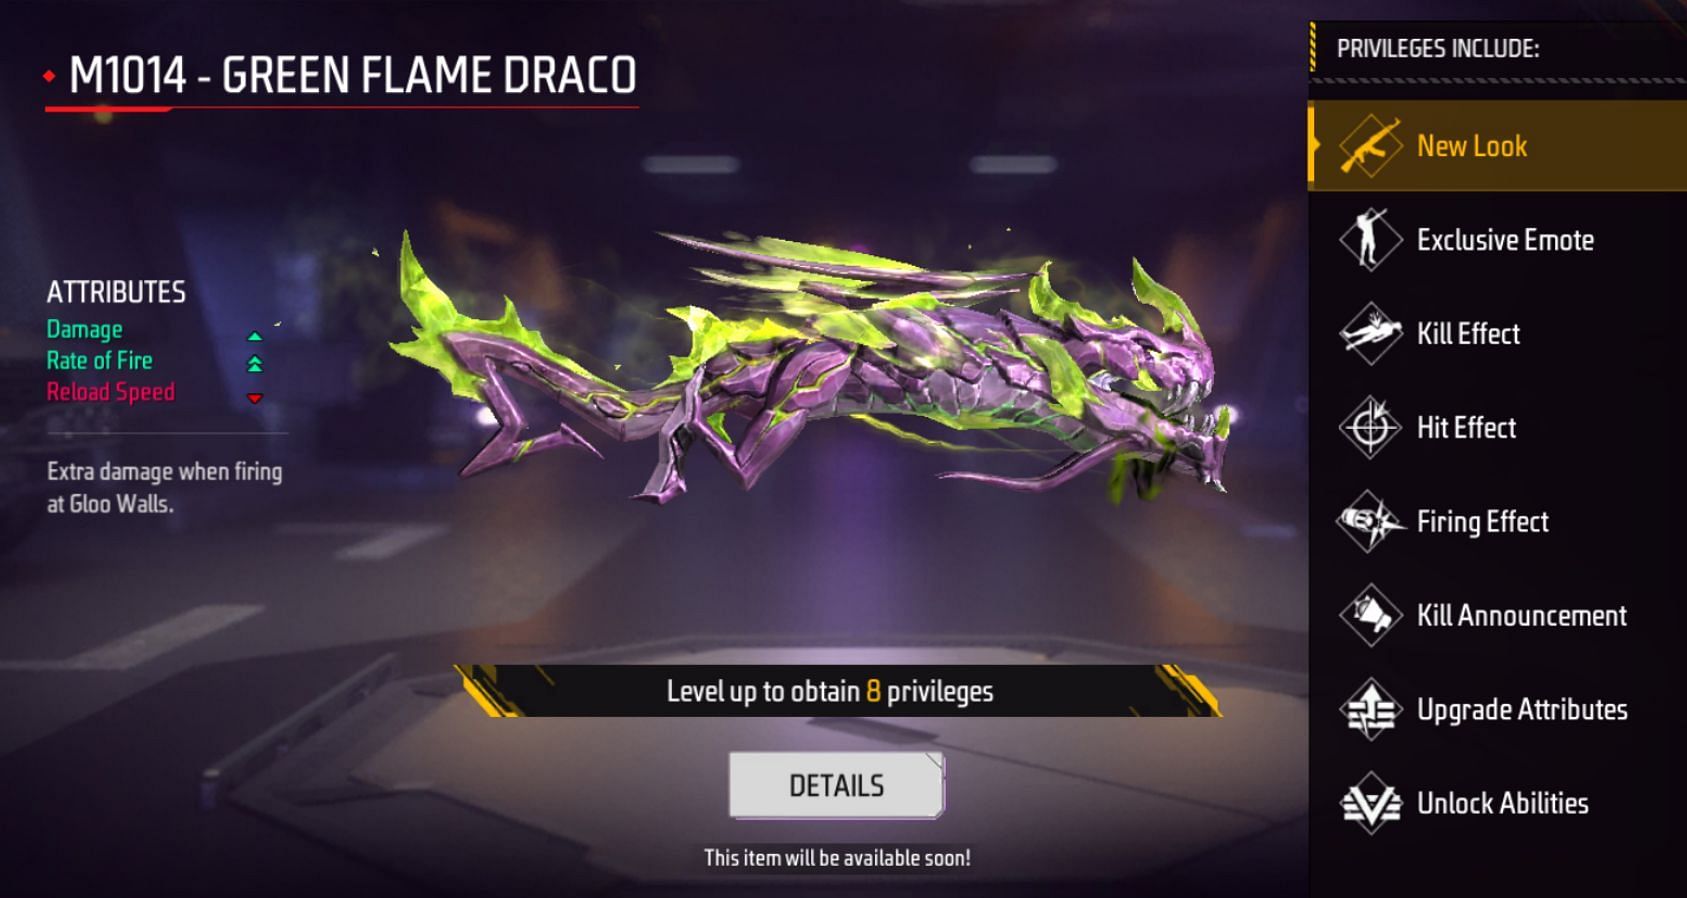 M1014 - Green Flame Draco was released in Free Fire in May 2021 (Image via Garena)